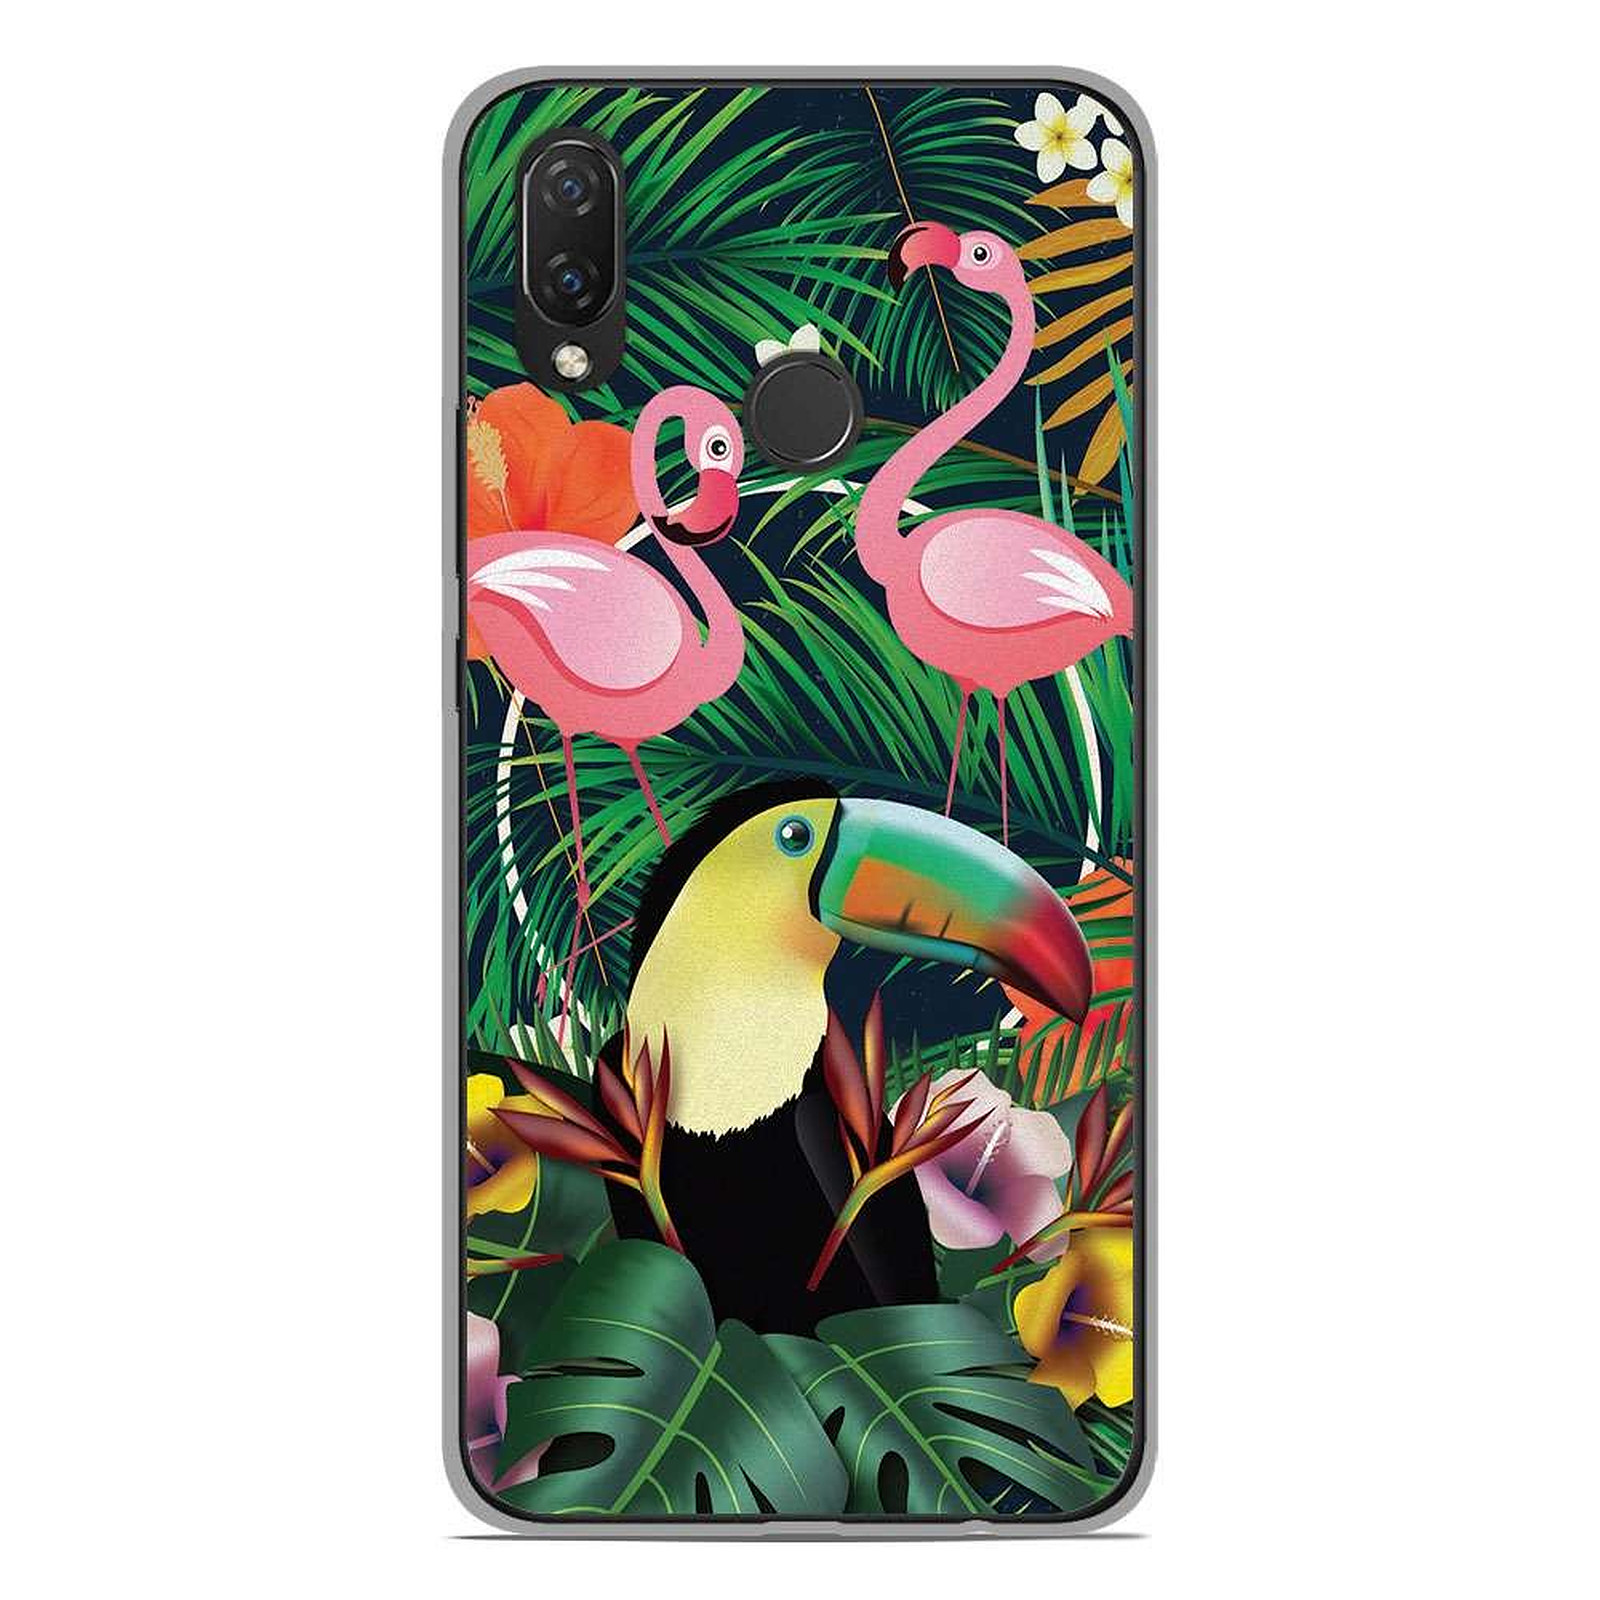 1001 Coques Coque silicone gel Huawei P Smart Plus motif Tropical Toucan - Coque telephone 1001Coques